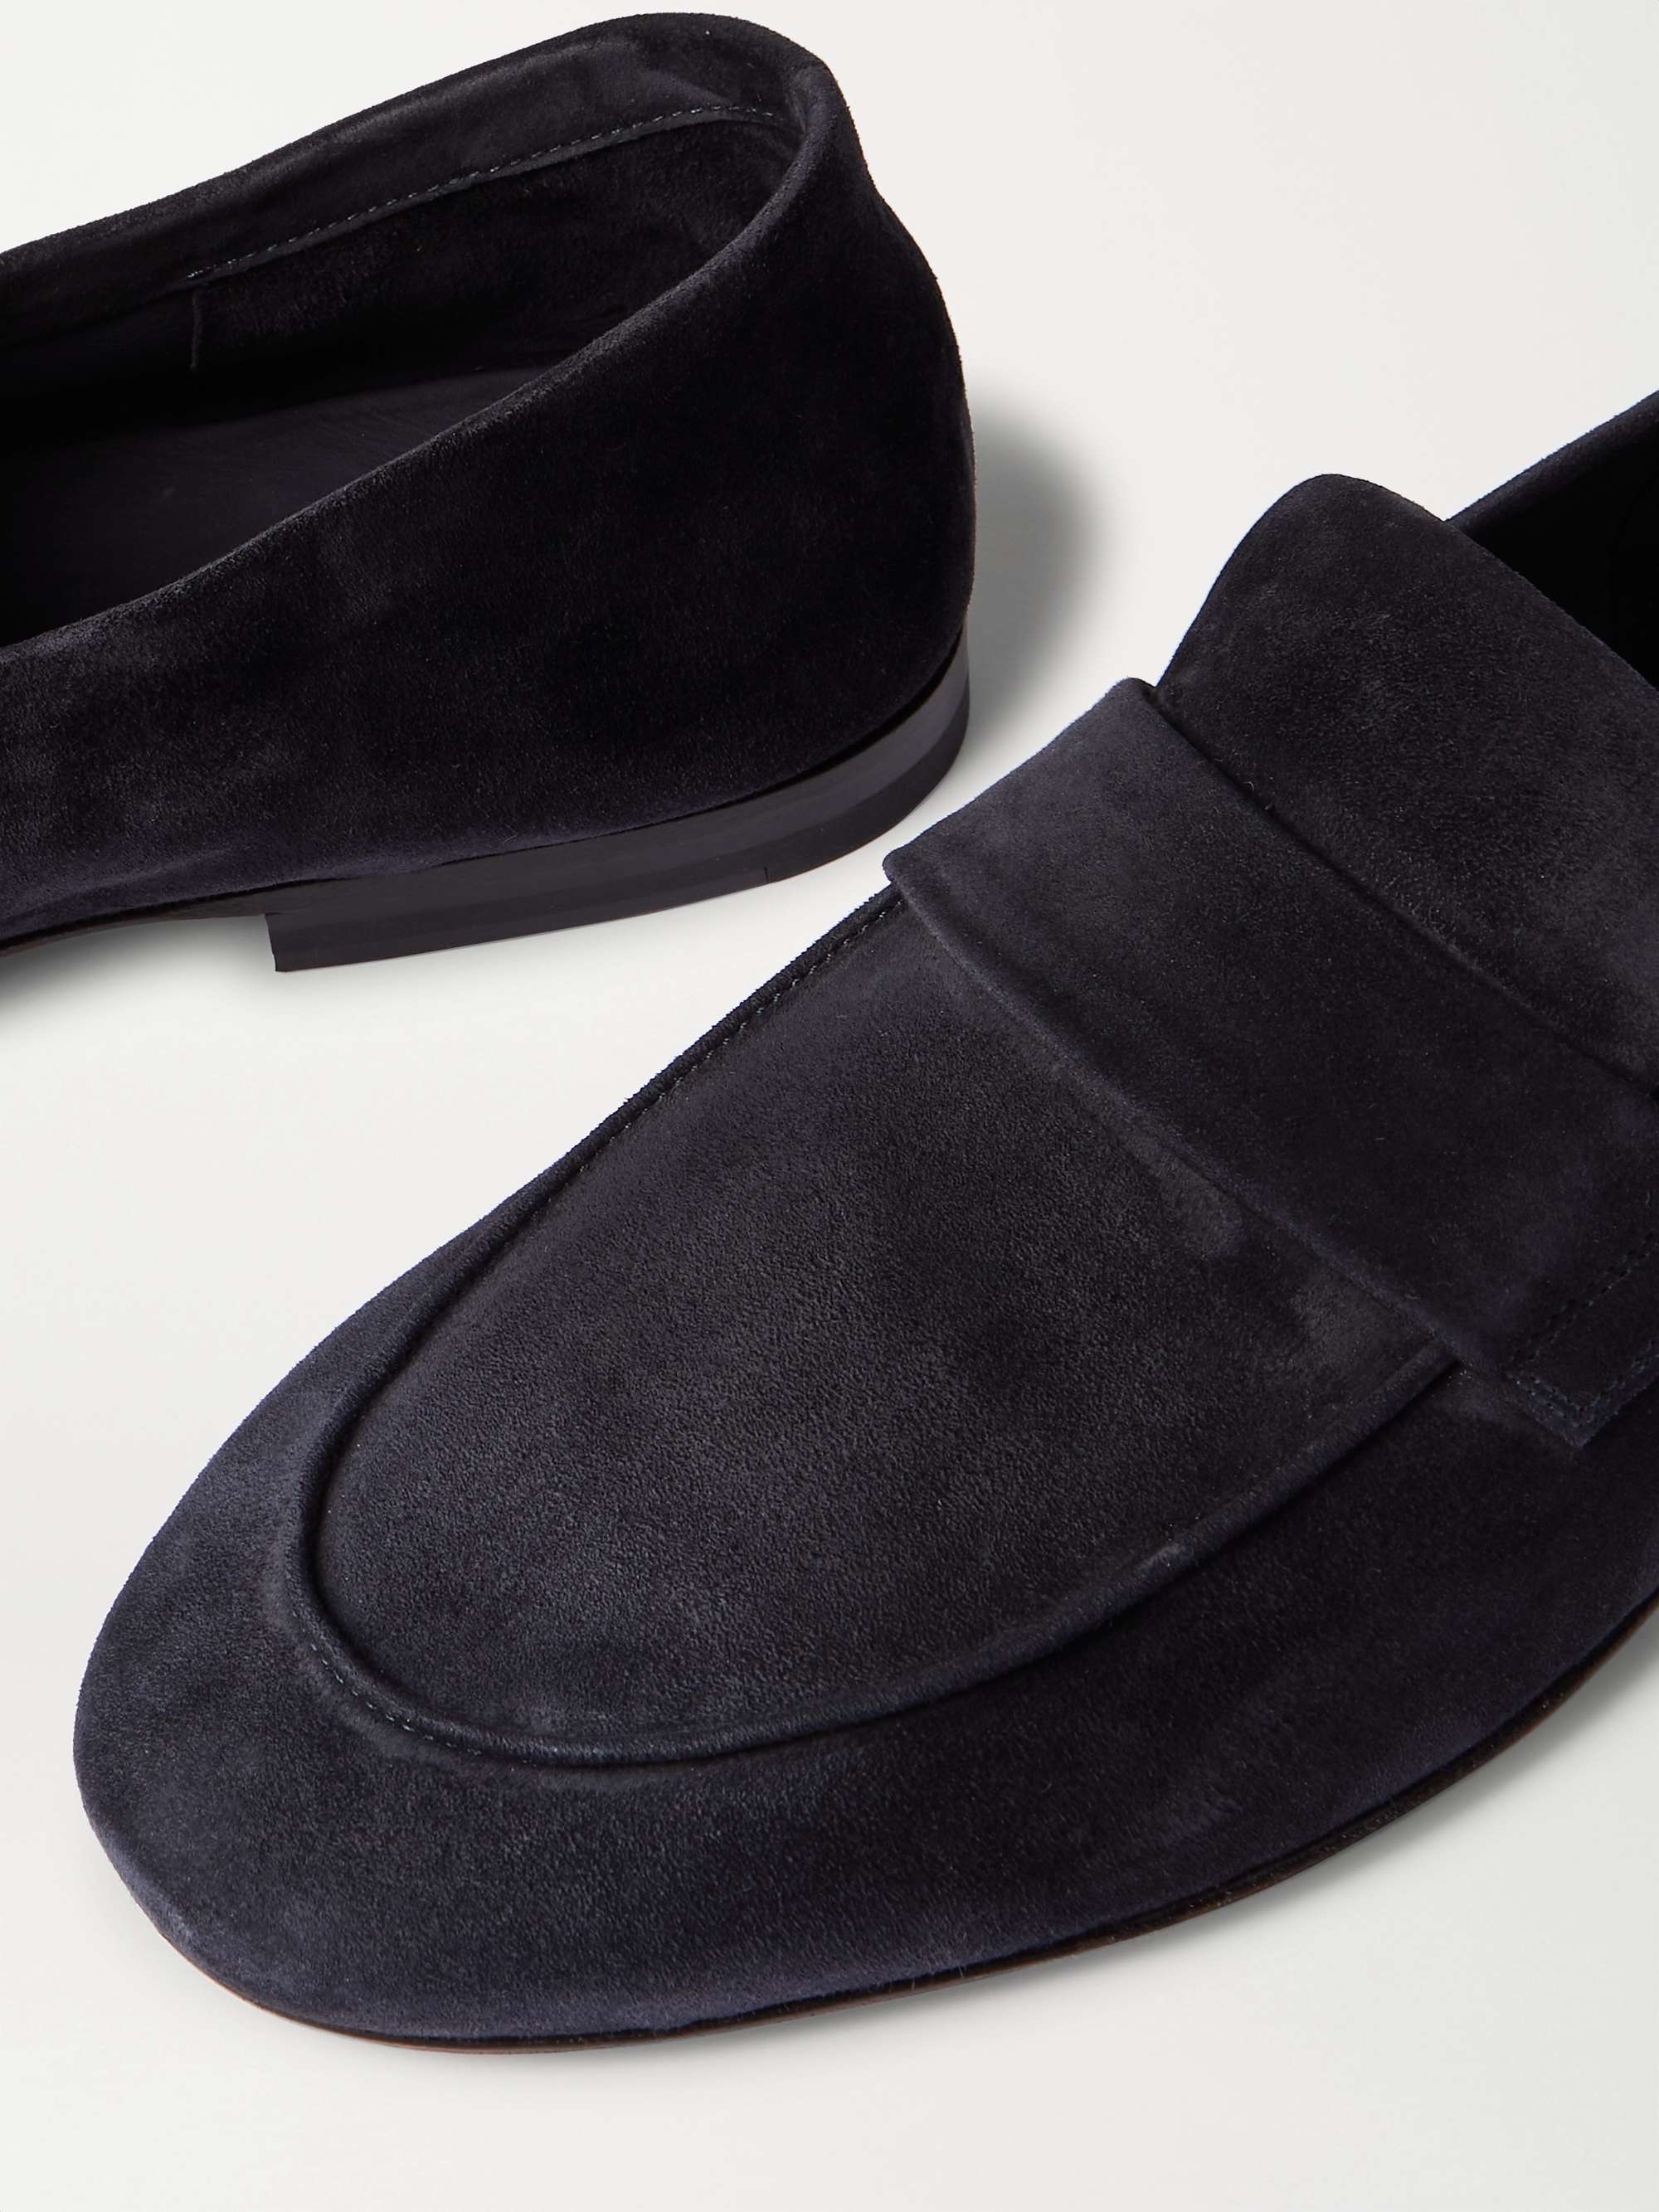 OFFICINE CREATIVE Airto Suede Loafers for Men | MR PORTER